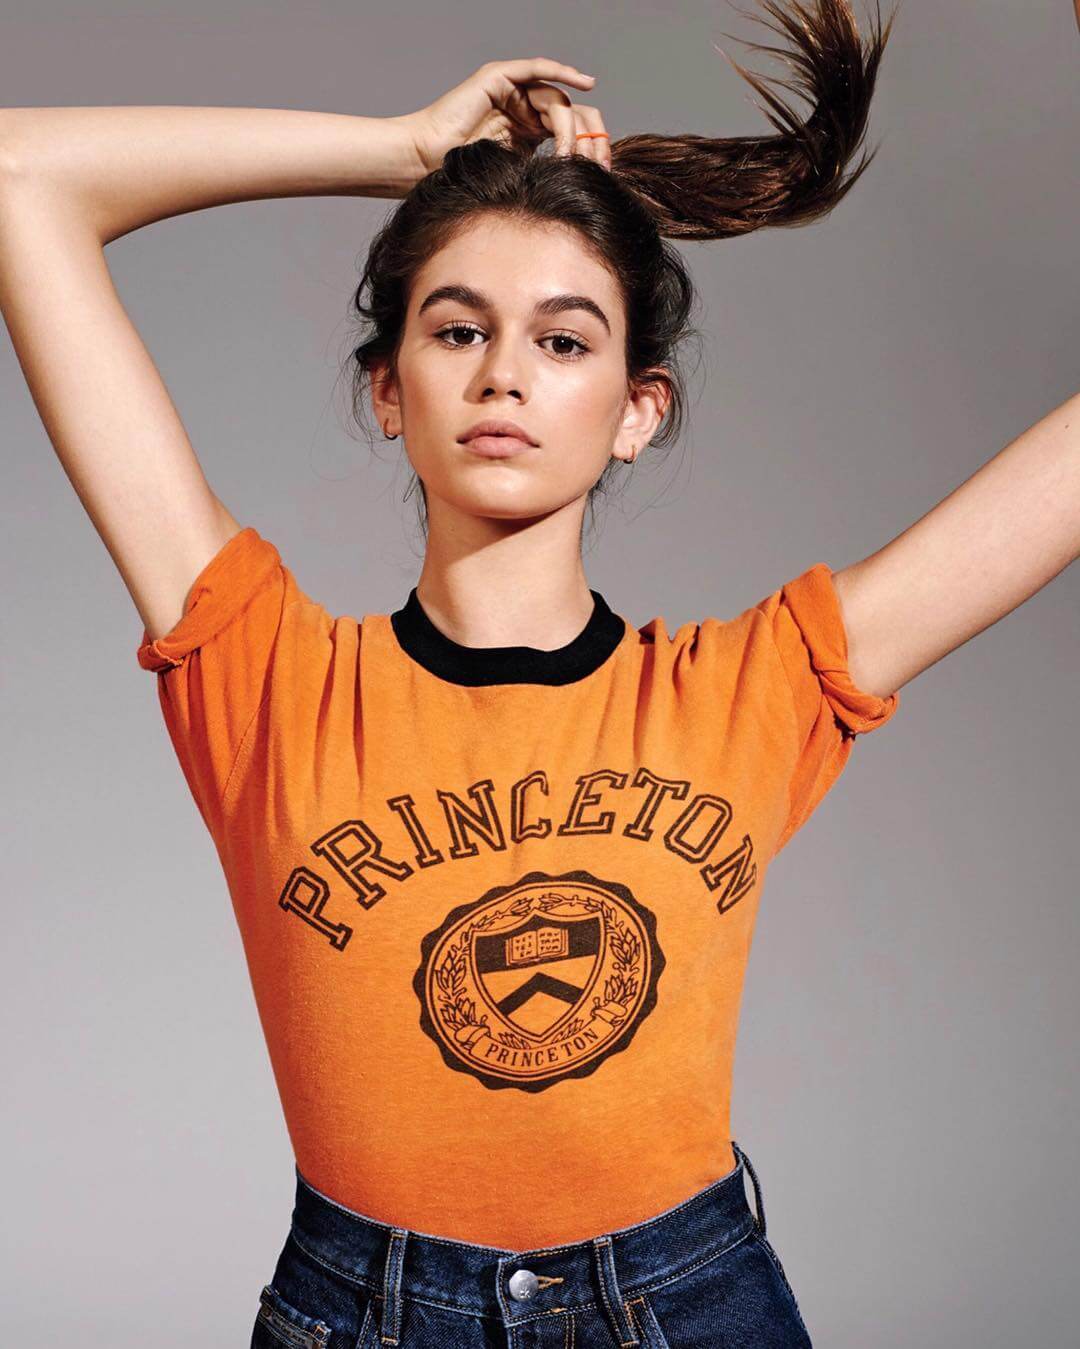 60+ Hot Pictures Of Kaia Jordan Gerber Which Are Just Too Damn Cute And Sexy At The Same Time | Best Of Comic Books